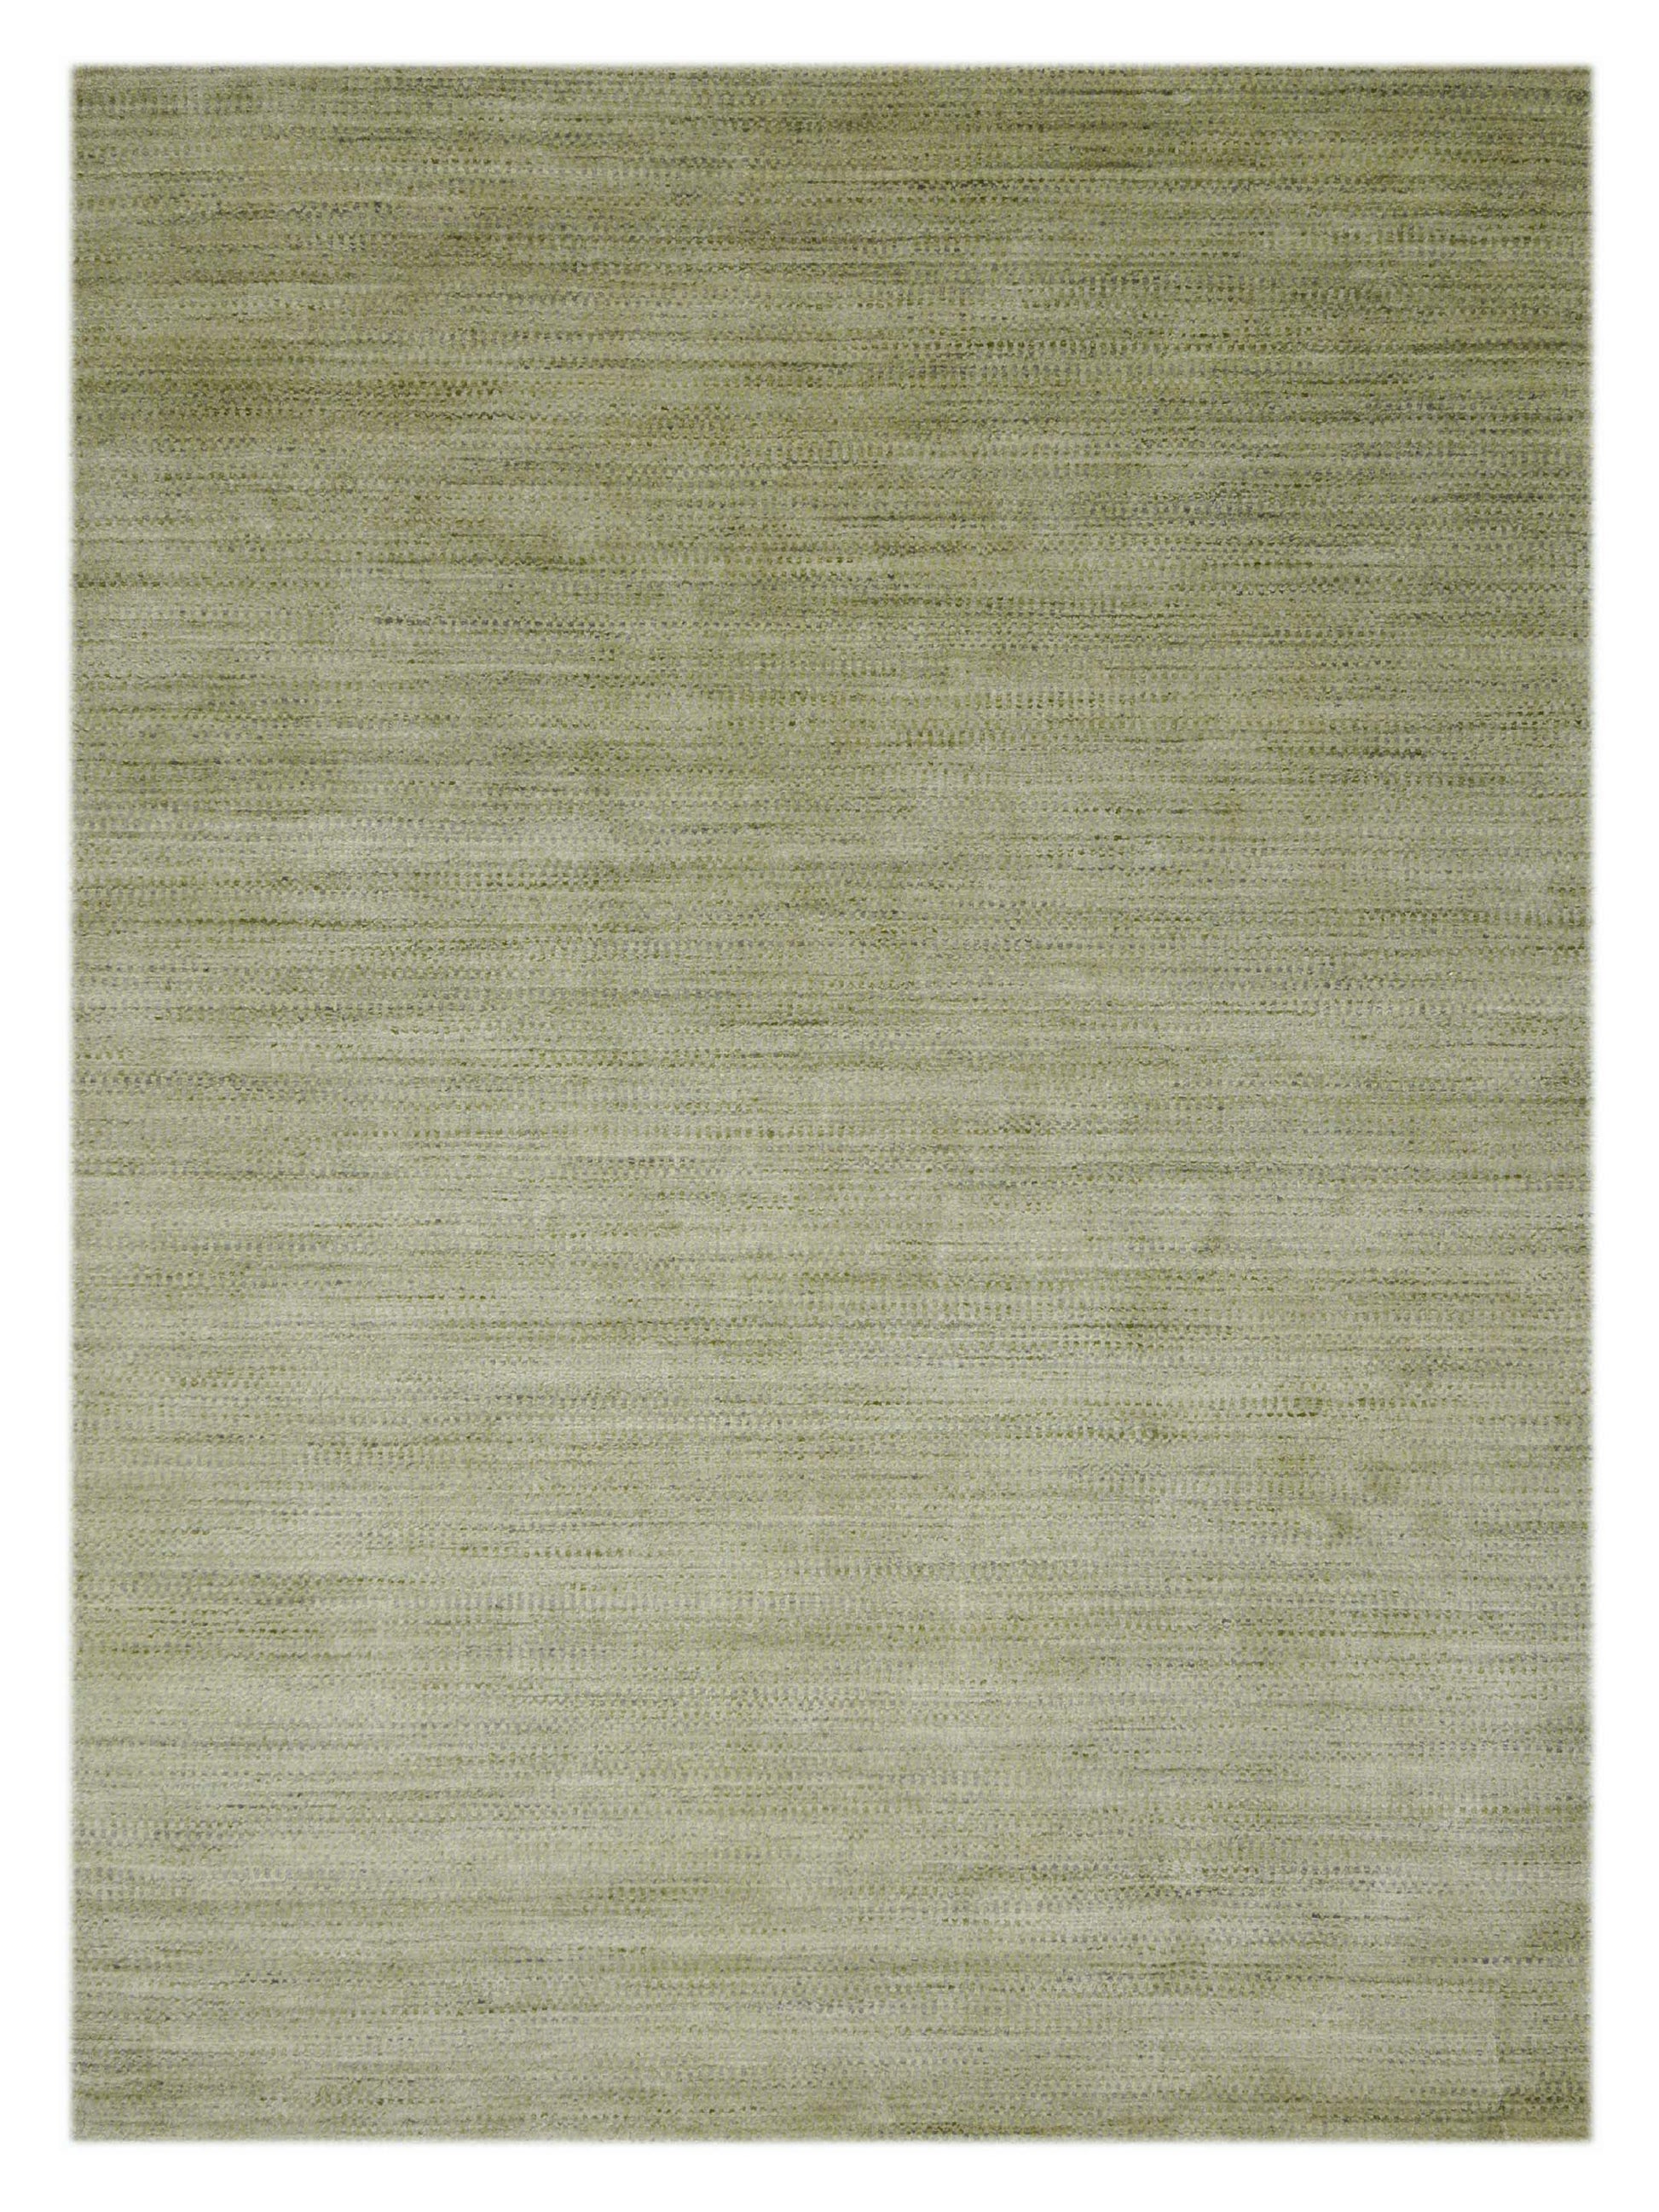 Limited REDCLIFFE RD-804 SAGE Transitional Woven Rug